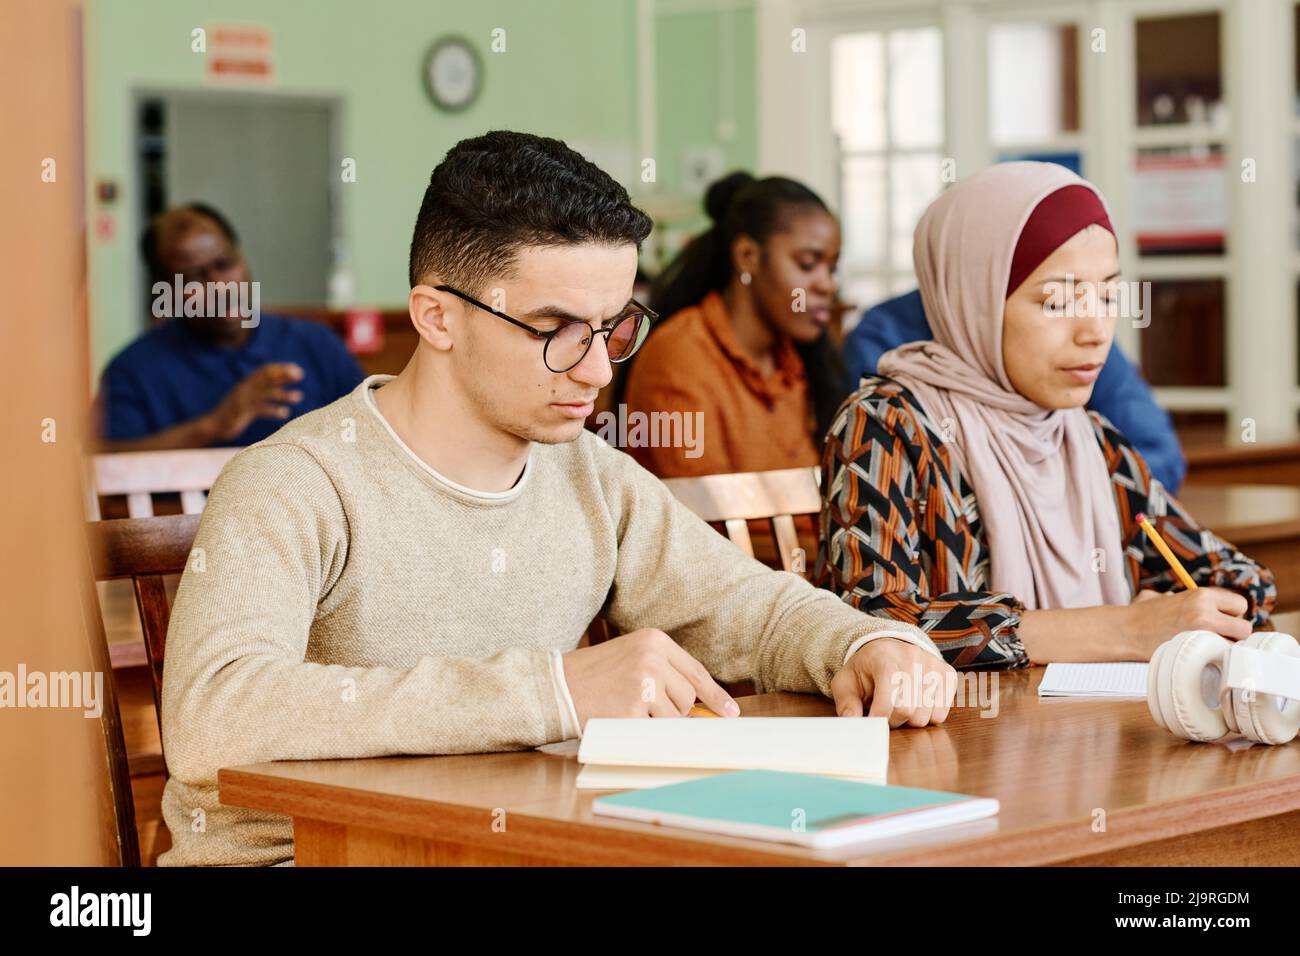 Group of immigrant students in international class sitting at desk reading and making notes during lesson Stock Photo